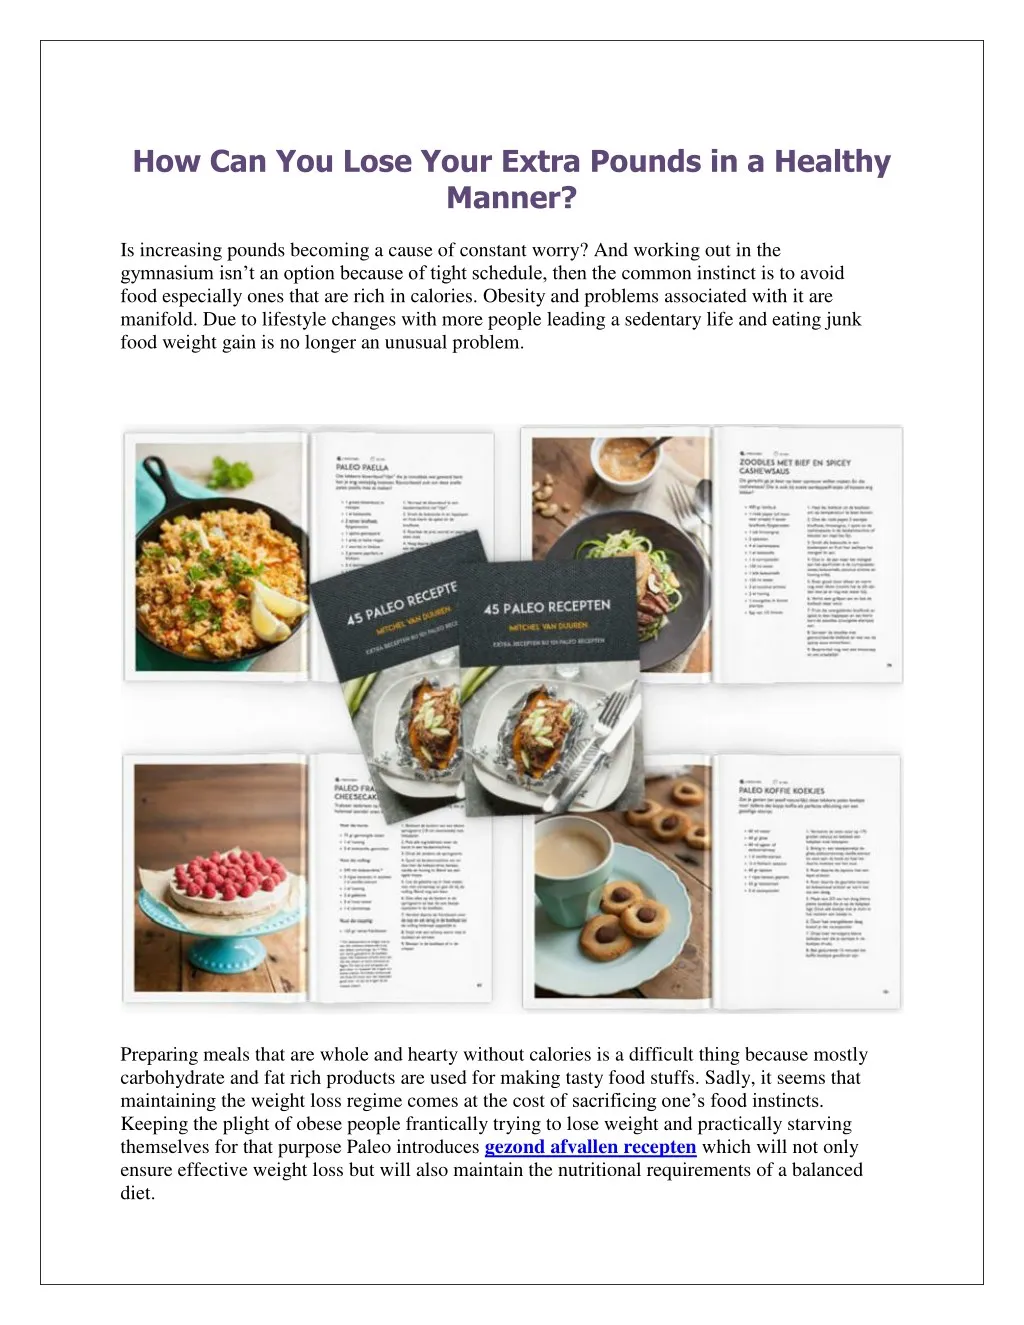 how can you lose your extra pounds in a healthy